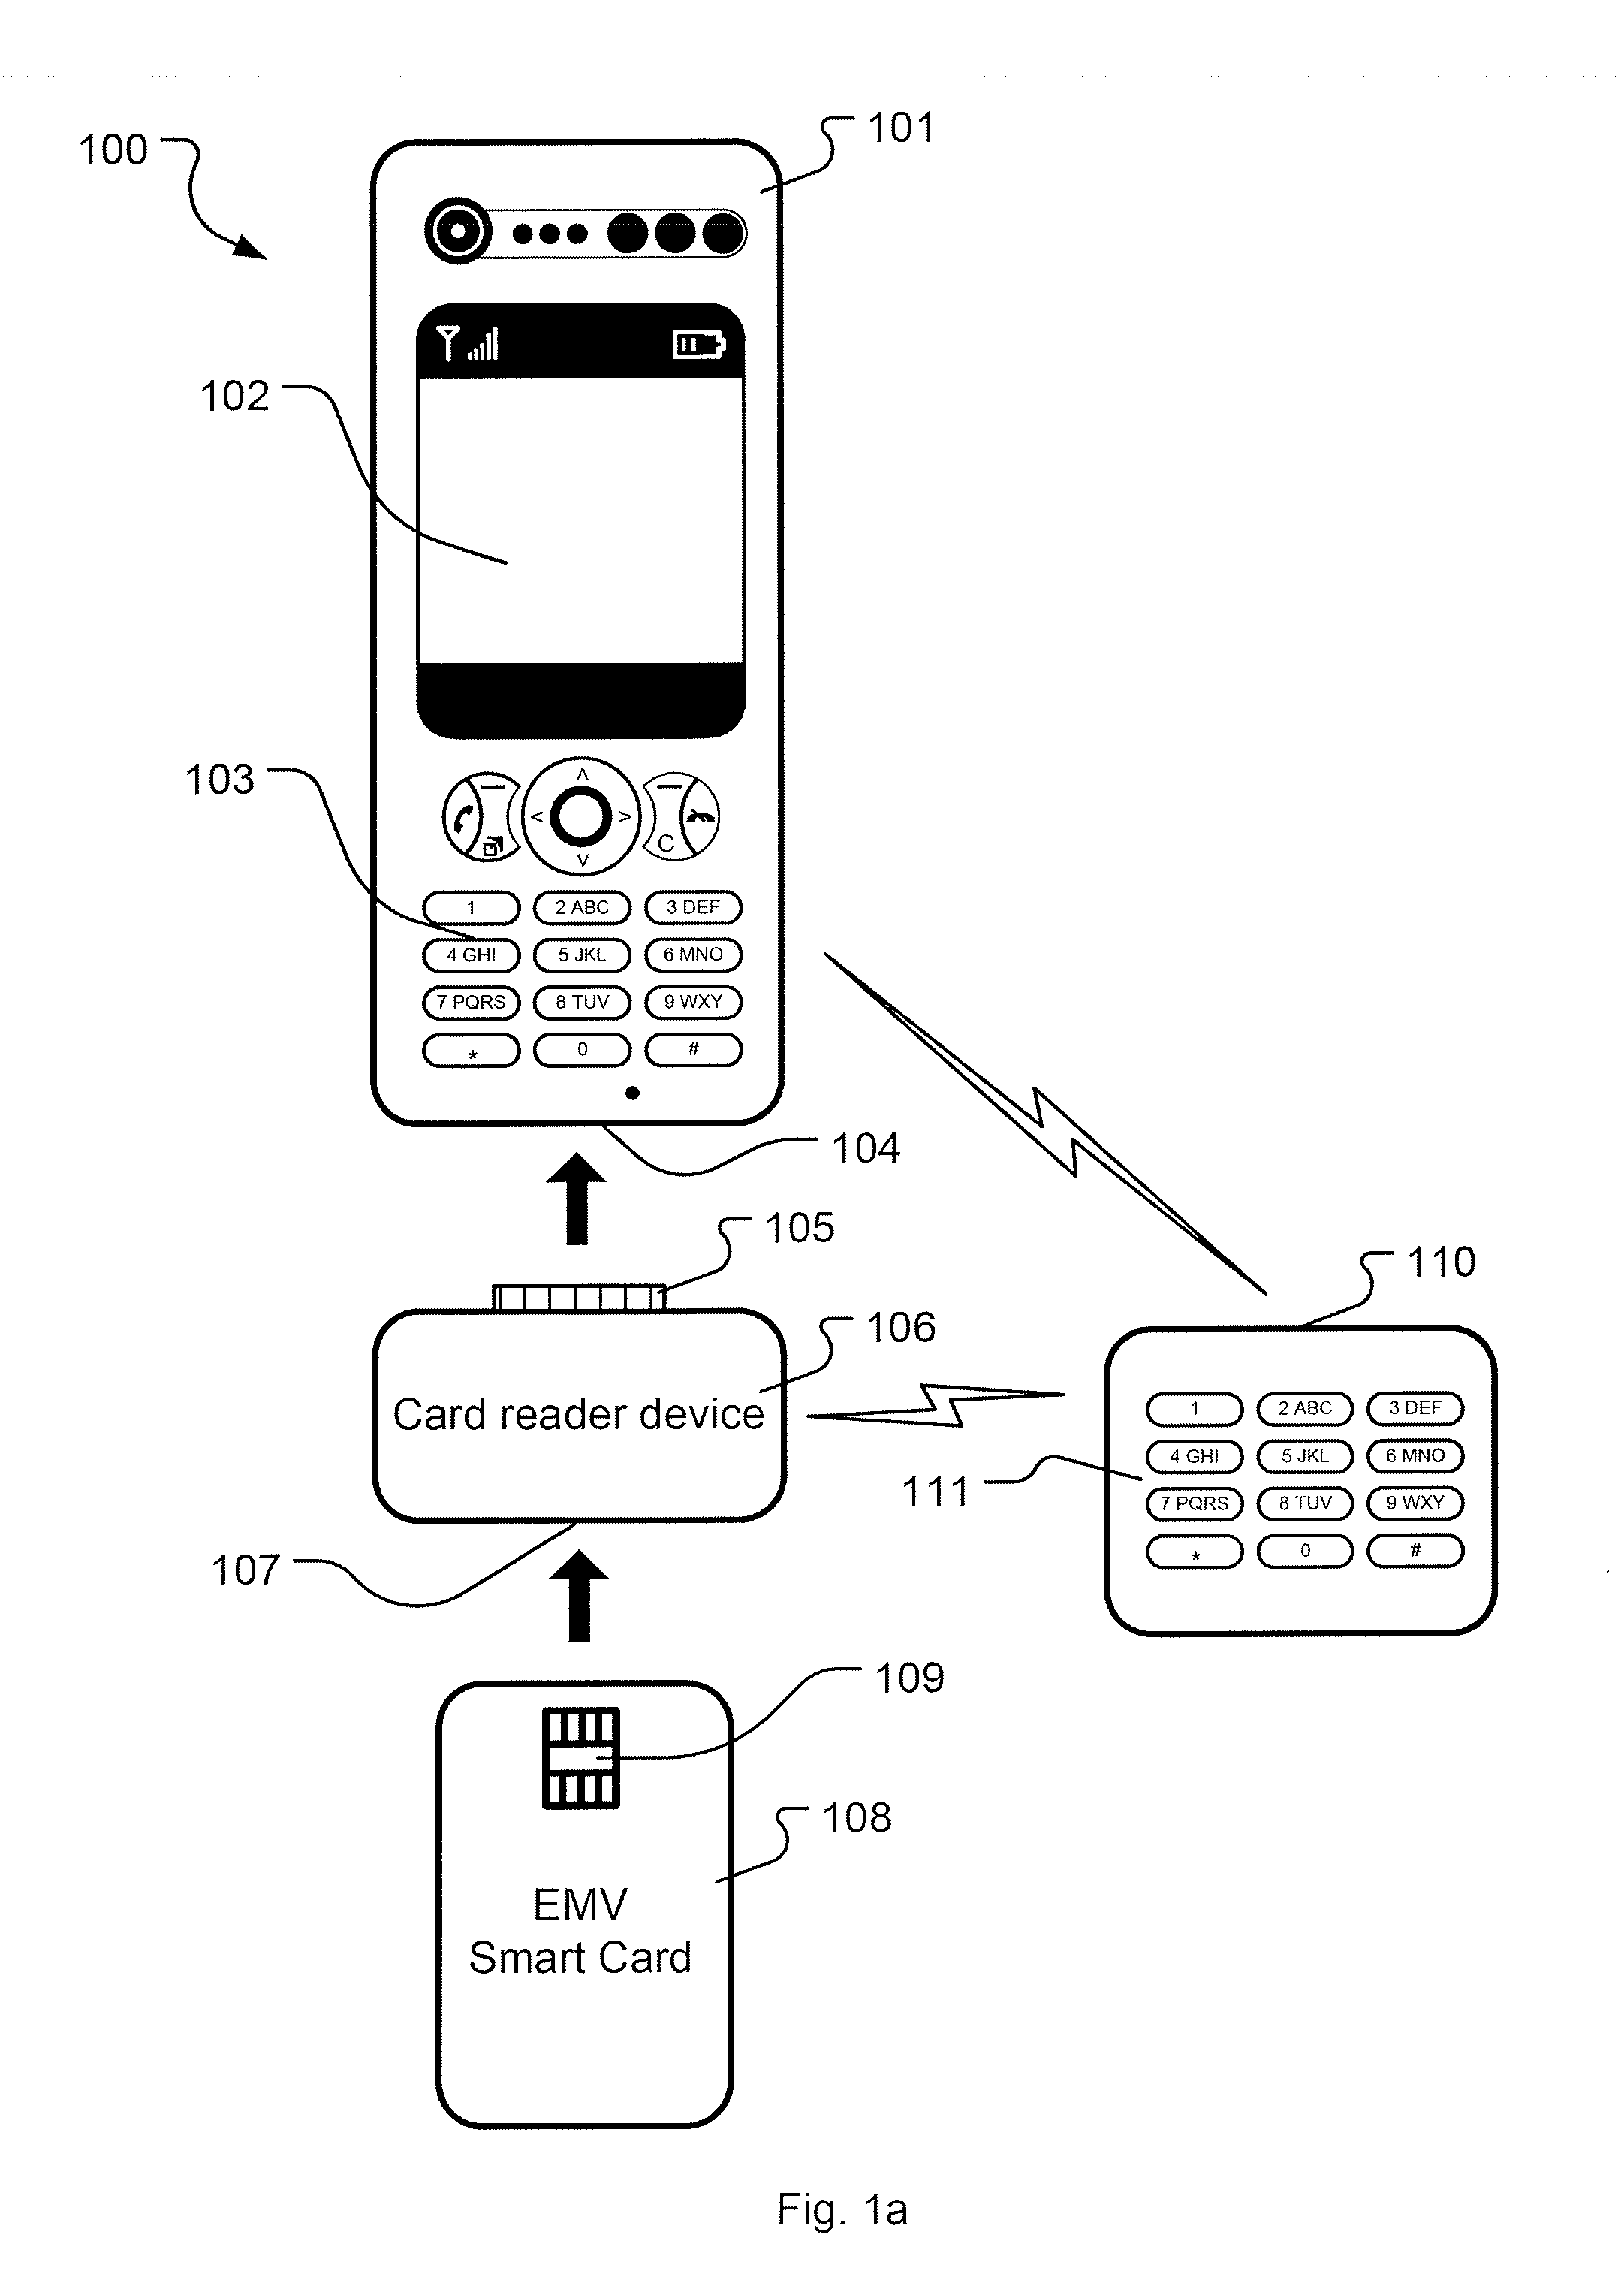 Stand-alone secure pin entry device for enabling emv card transactions with separate card reader